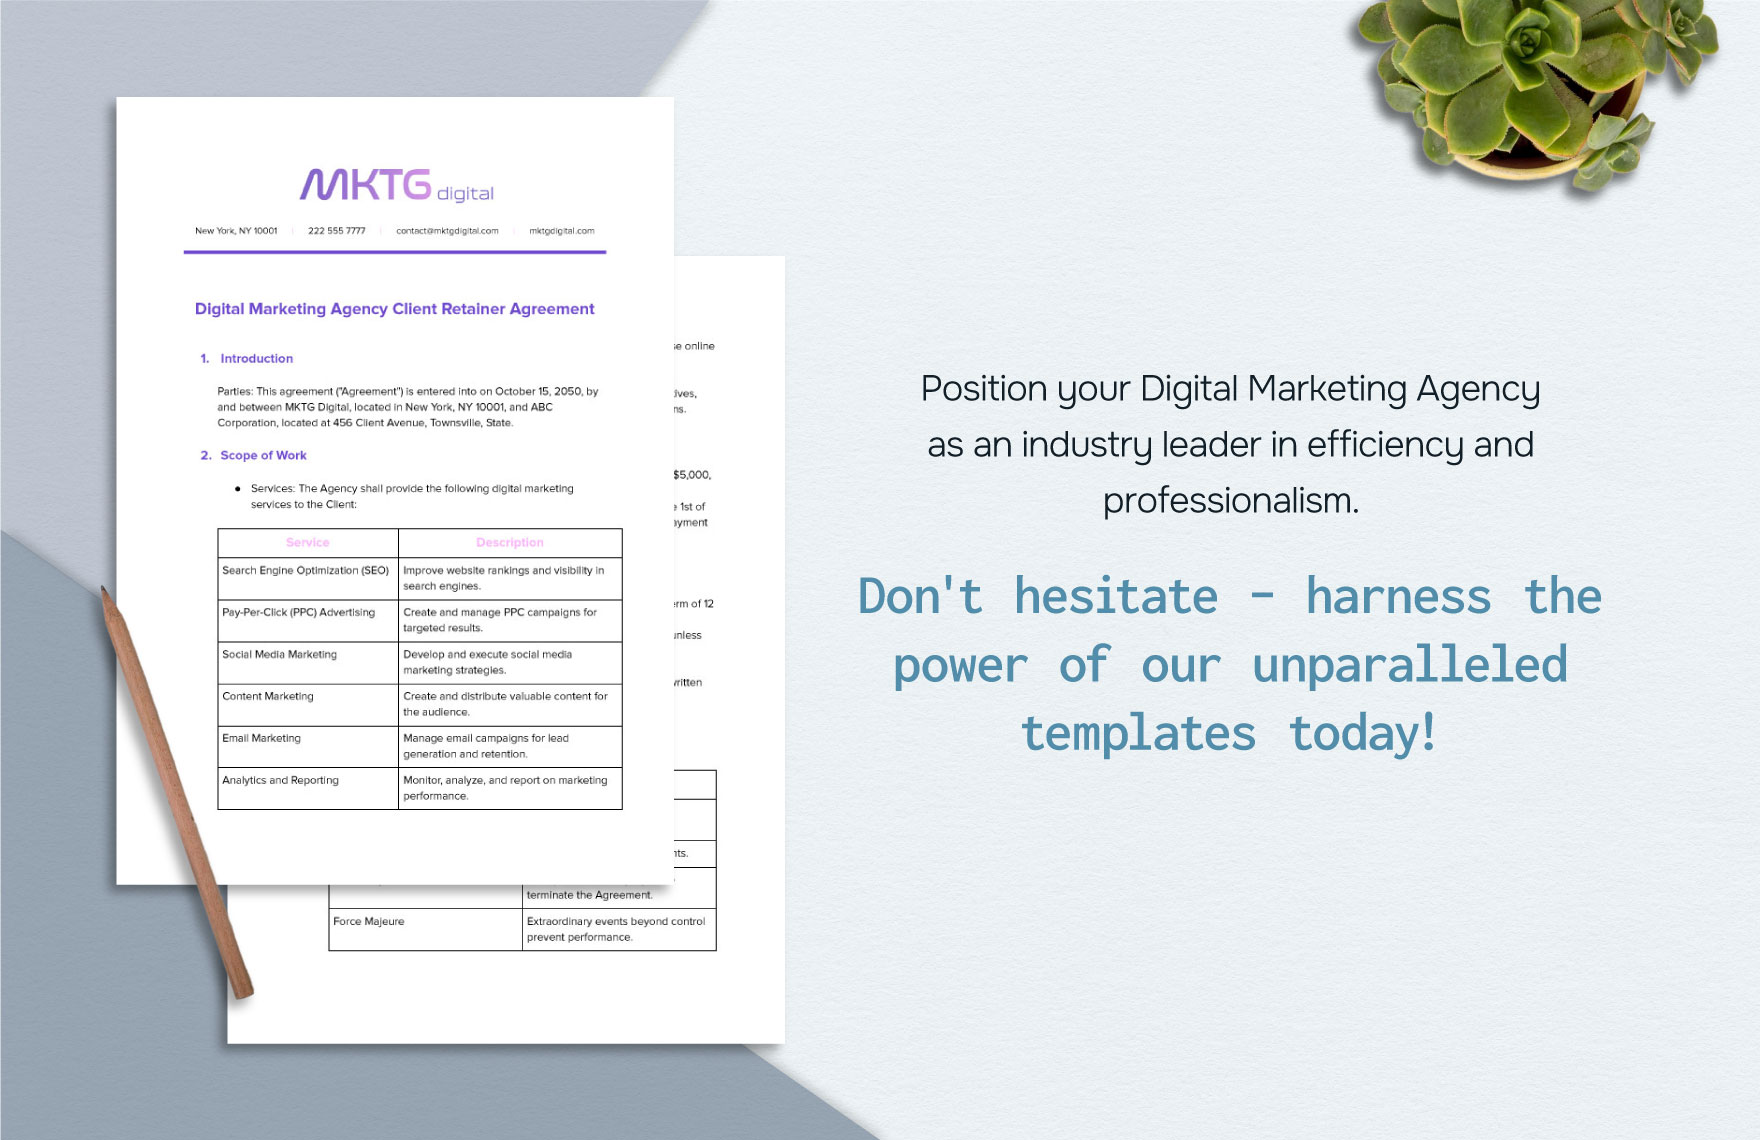 Digital Marketing Agency Client Retainer Agreement Template